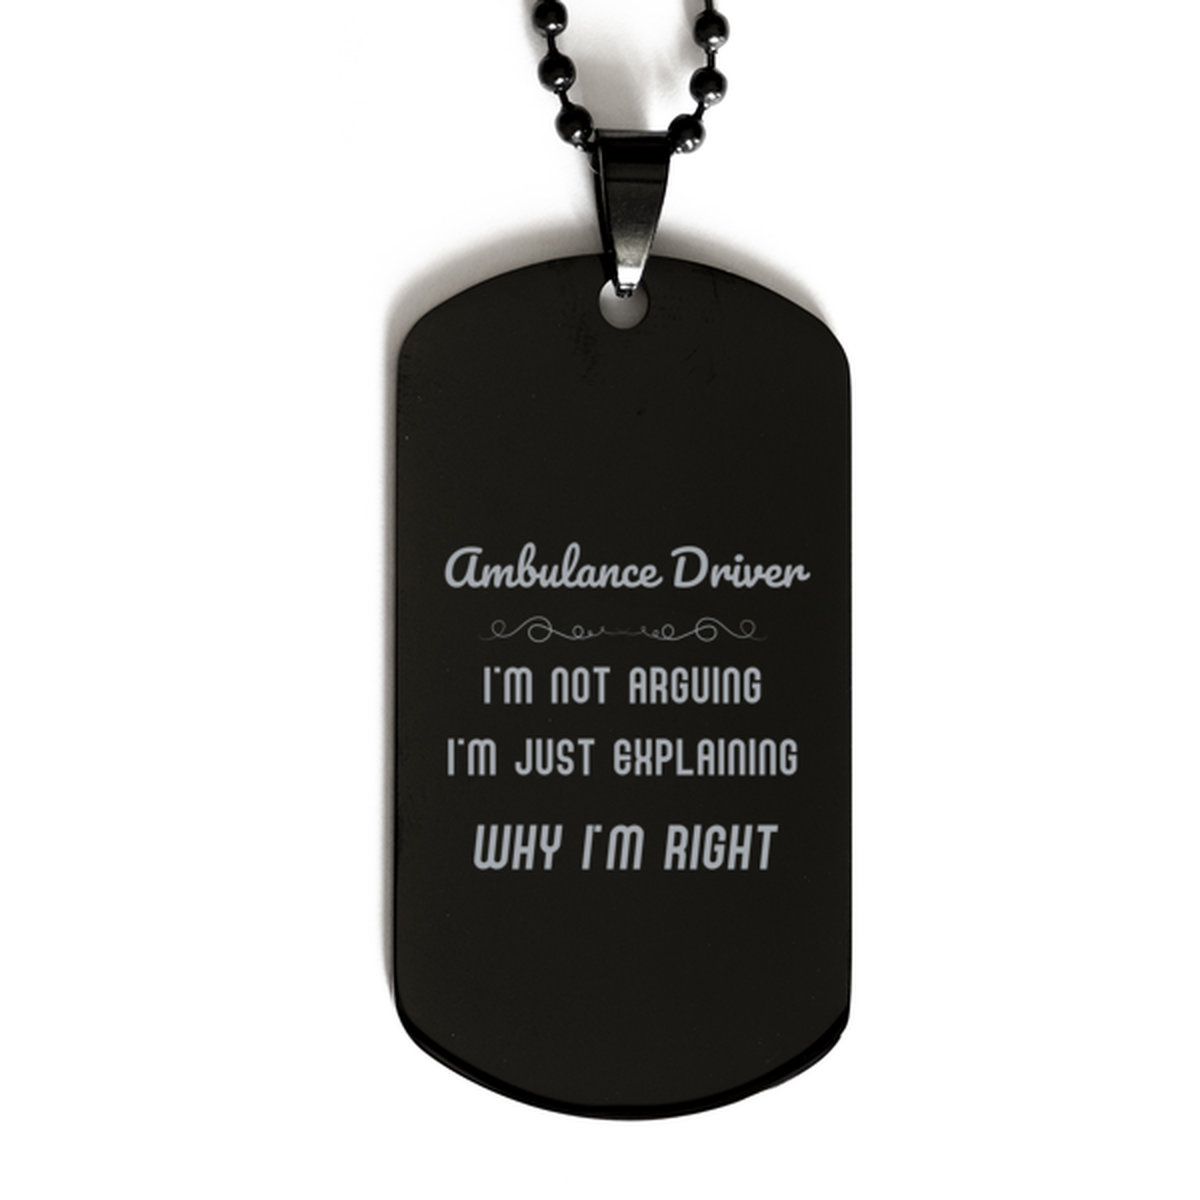 Ambulance Driver I'm not Arguing. I'm Just Explaining Why I'm RIGHT Black Dog Tag, Funny Saying Quote Ambulance Driver Gifts For Ambulance Driver Graduation Birthday Christmas Gifts for Men Women Coworker